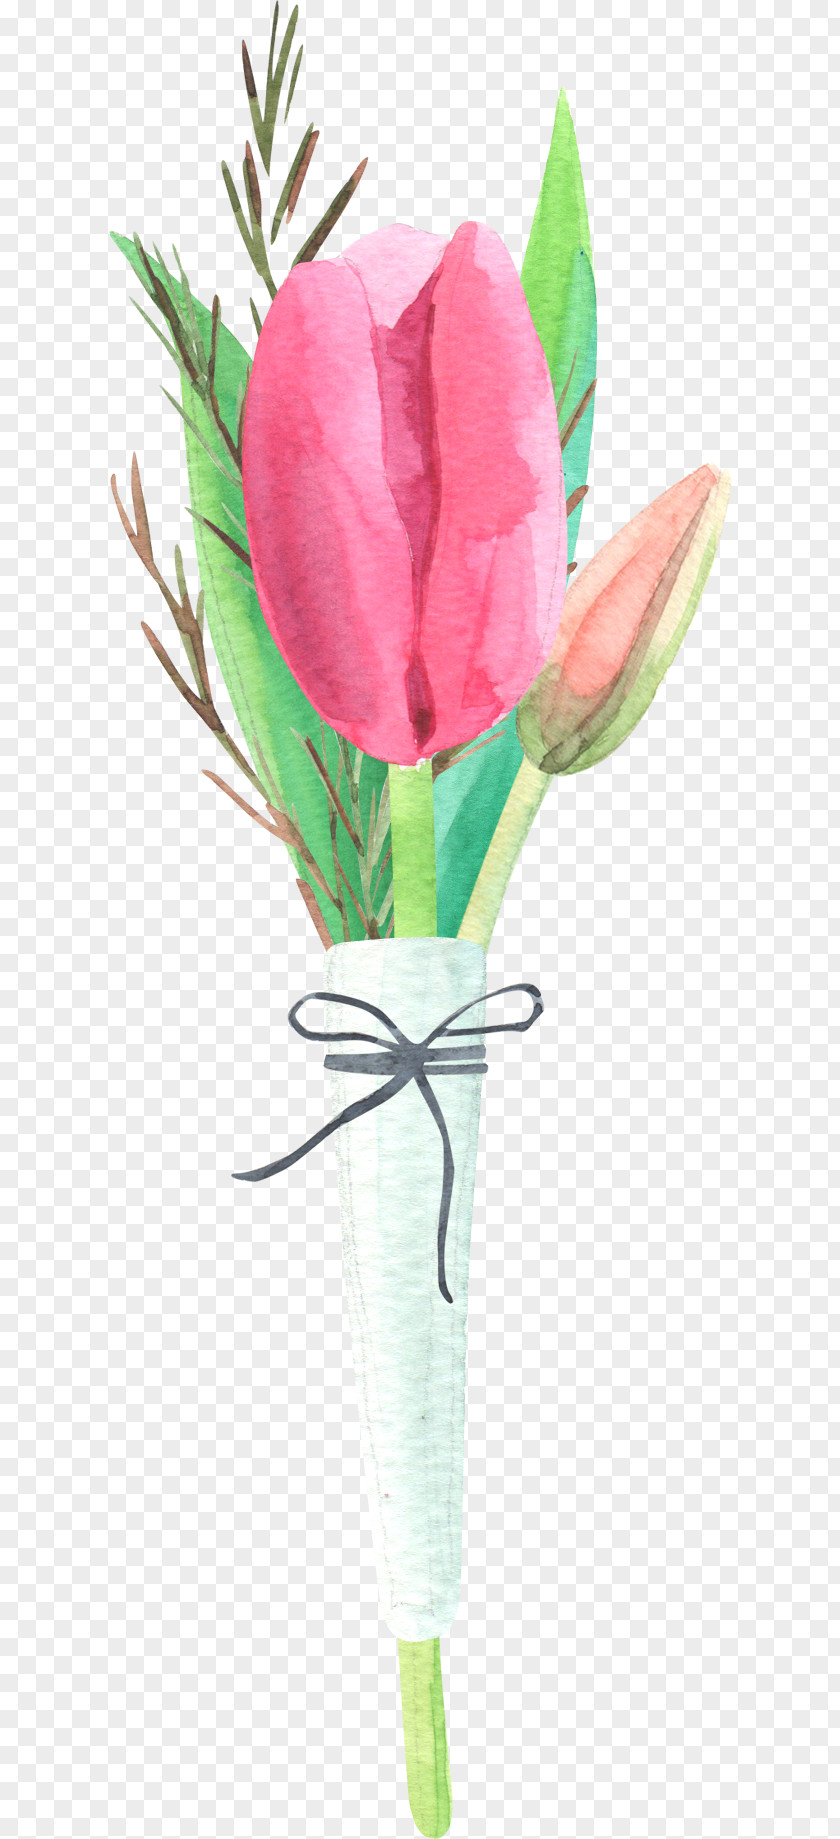 Bow And Tulips Tulip Flower Floral Design PNG